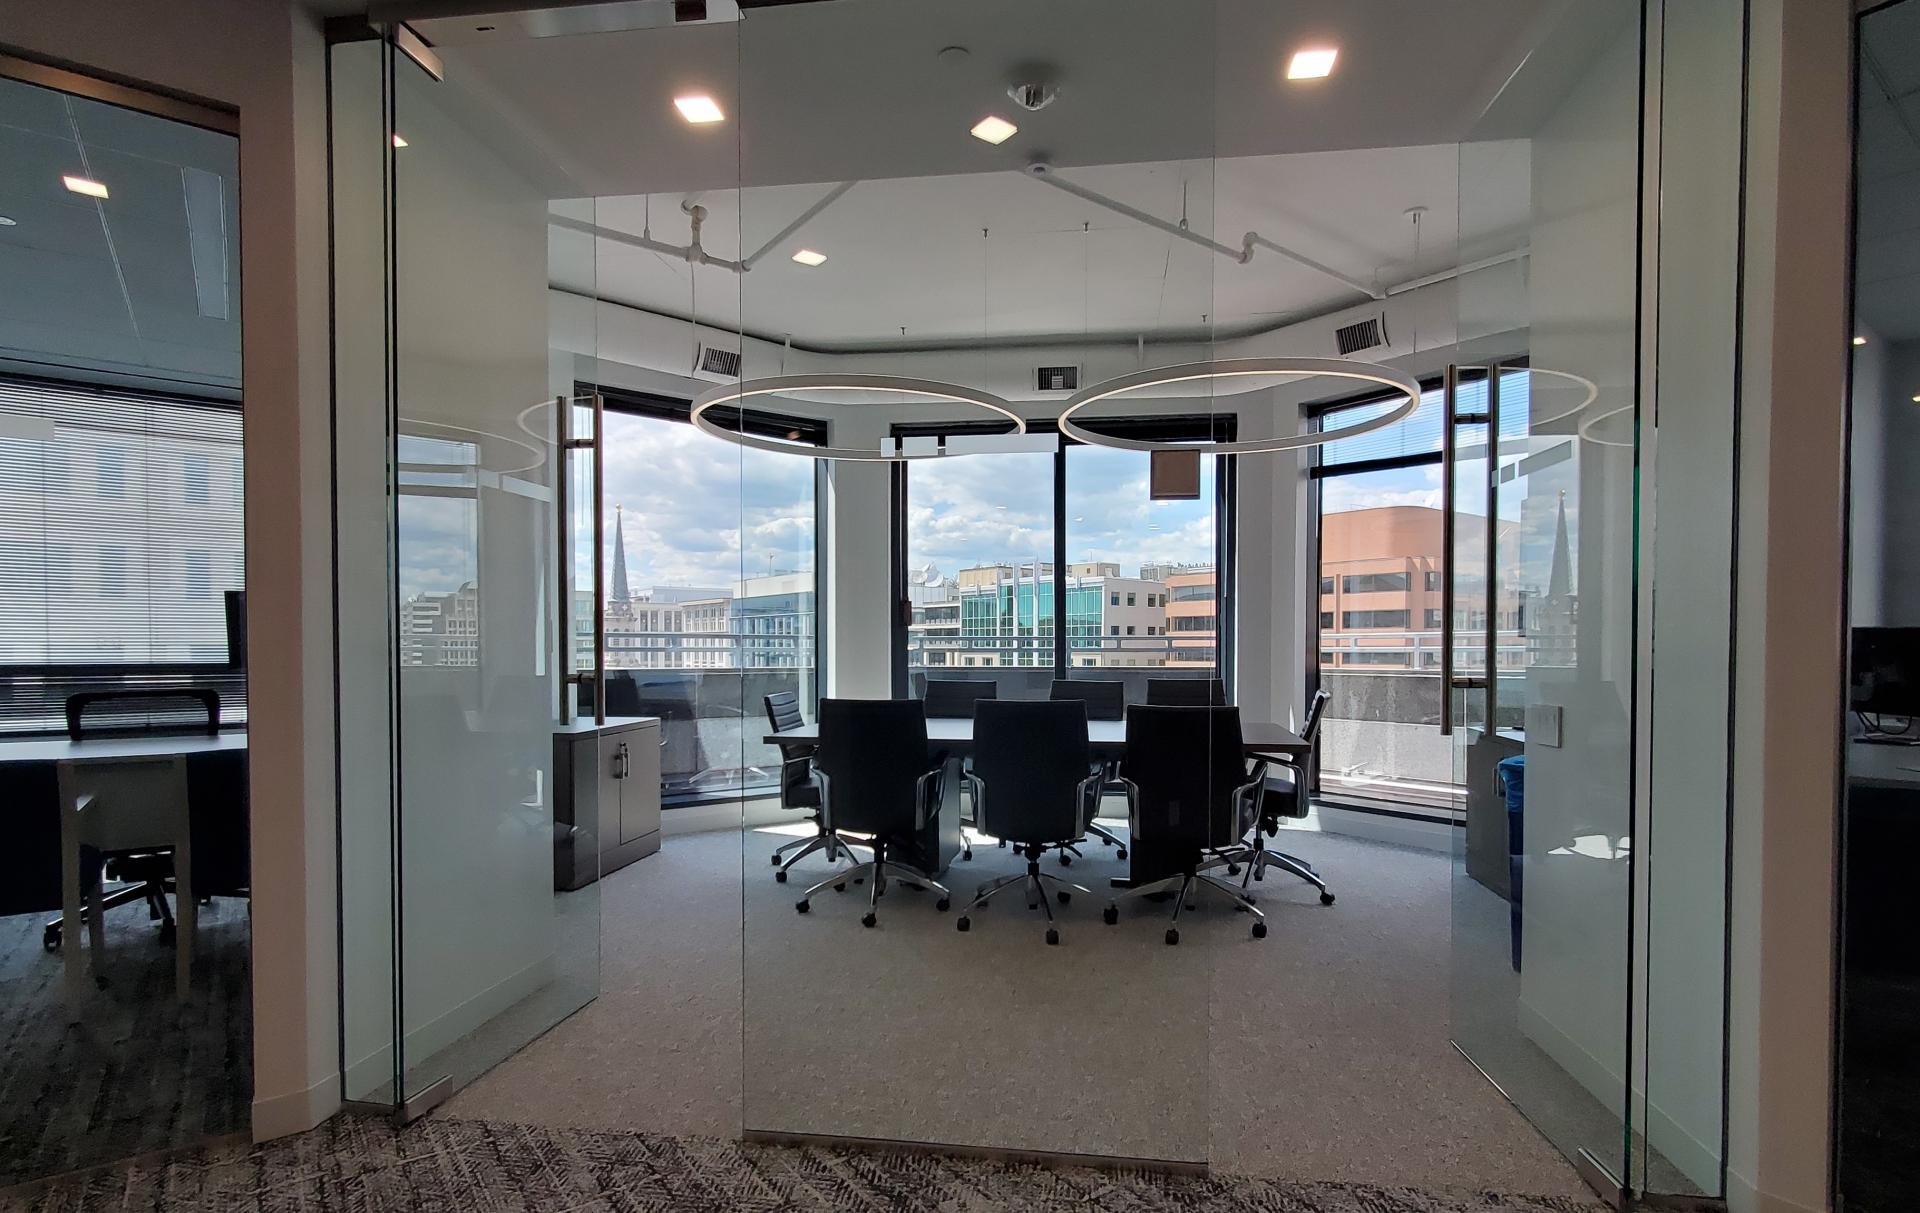 Natural light and glass partitions enhance teaming space